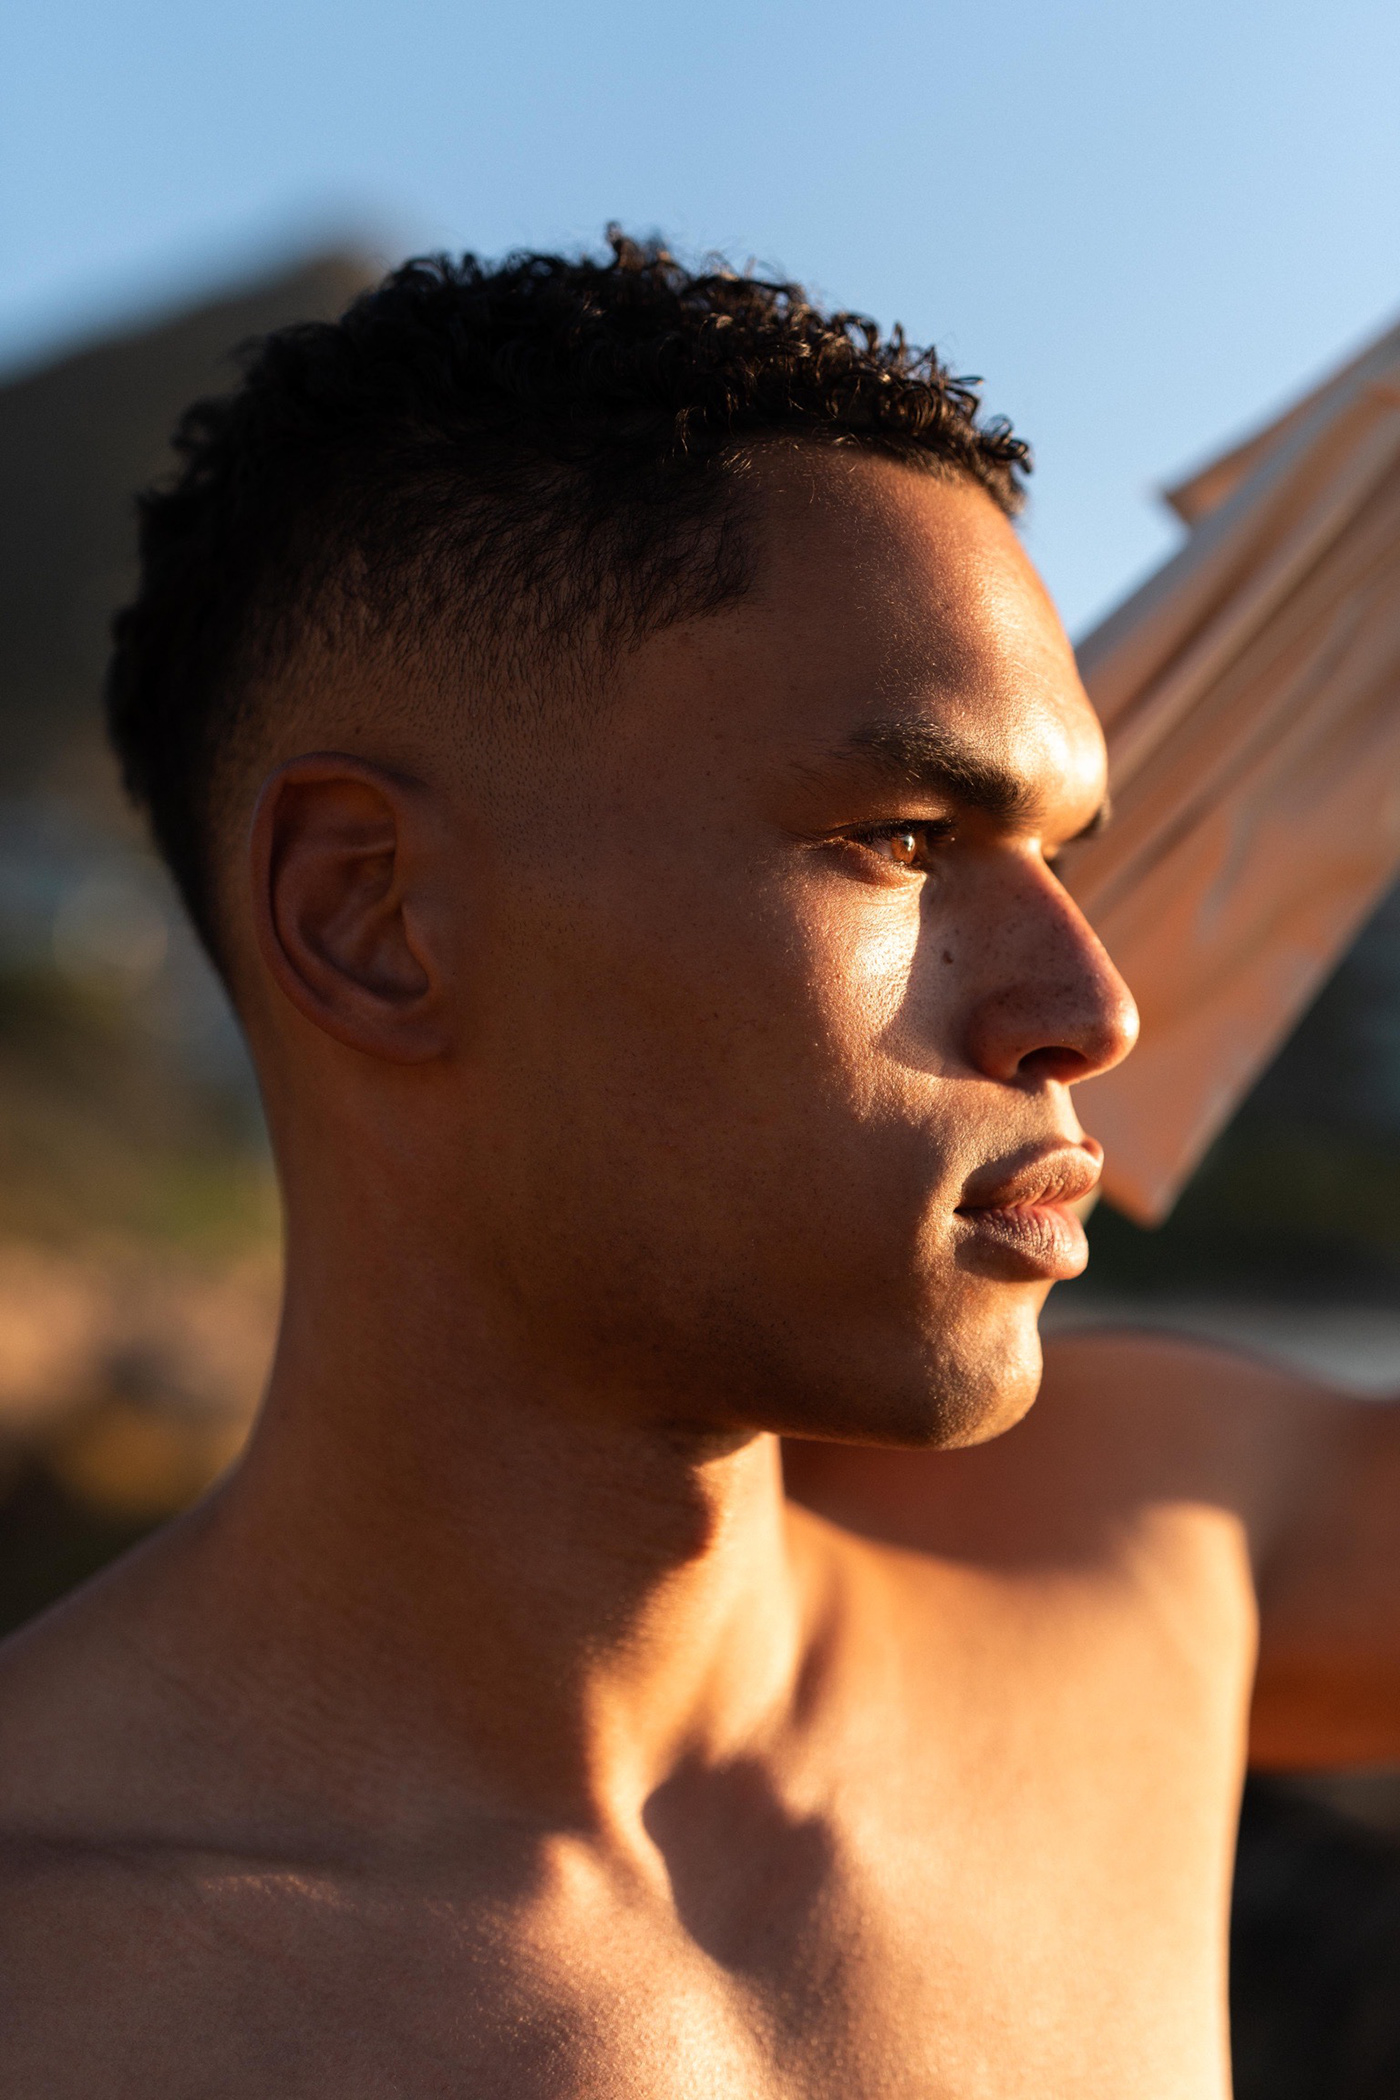 capetown sunset south africa male model editorial Fashion  beauty Photography  portrait model